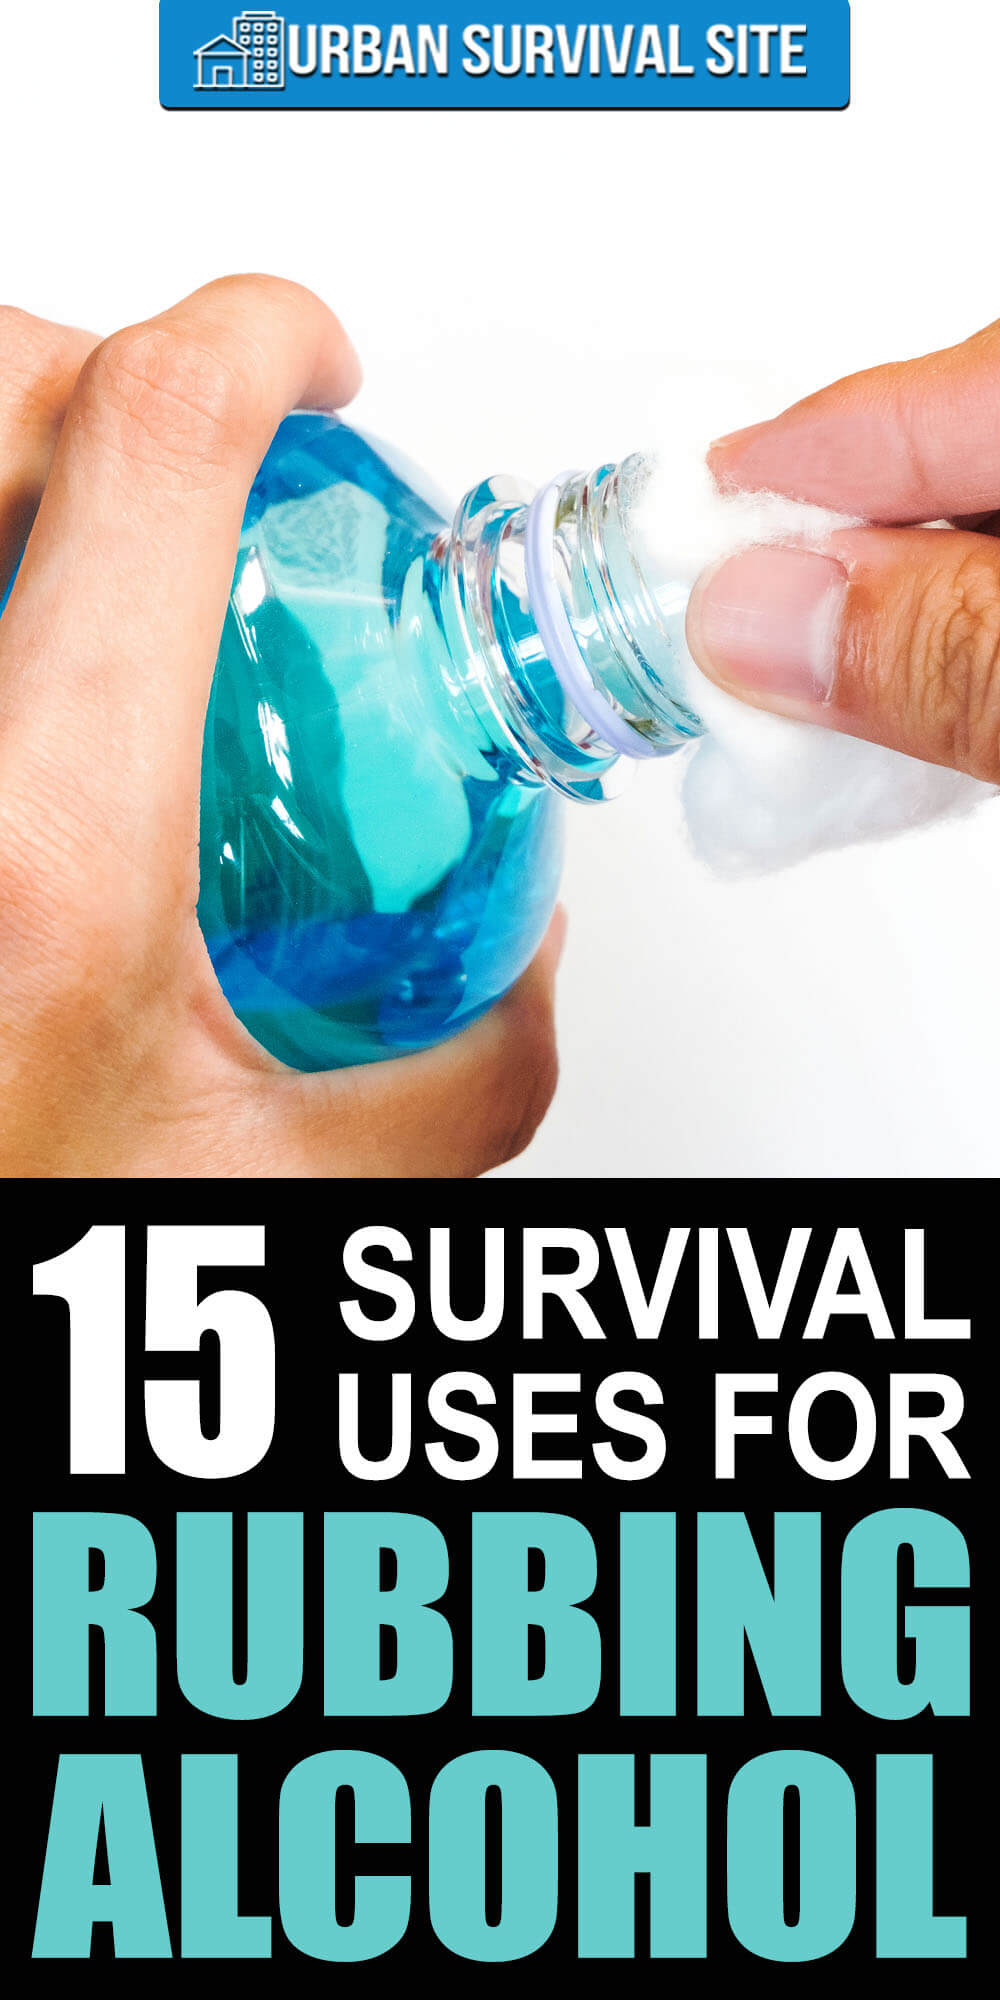 15 Survival Uses for Rubbing Alcohol